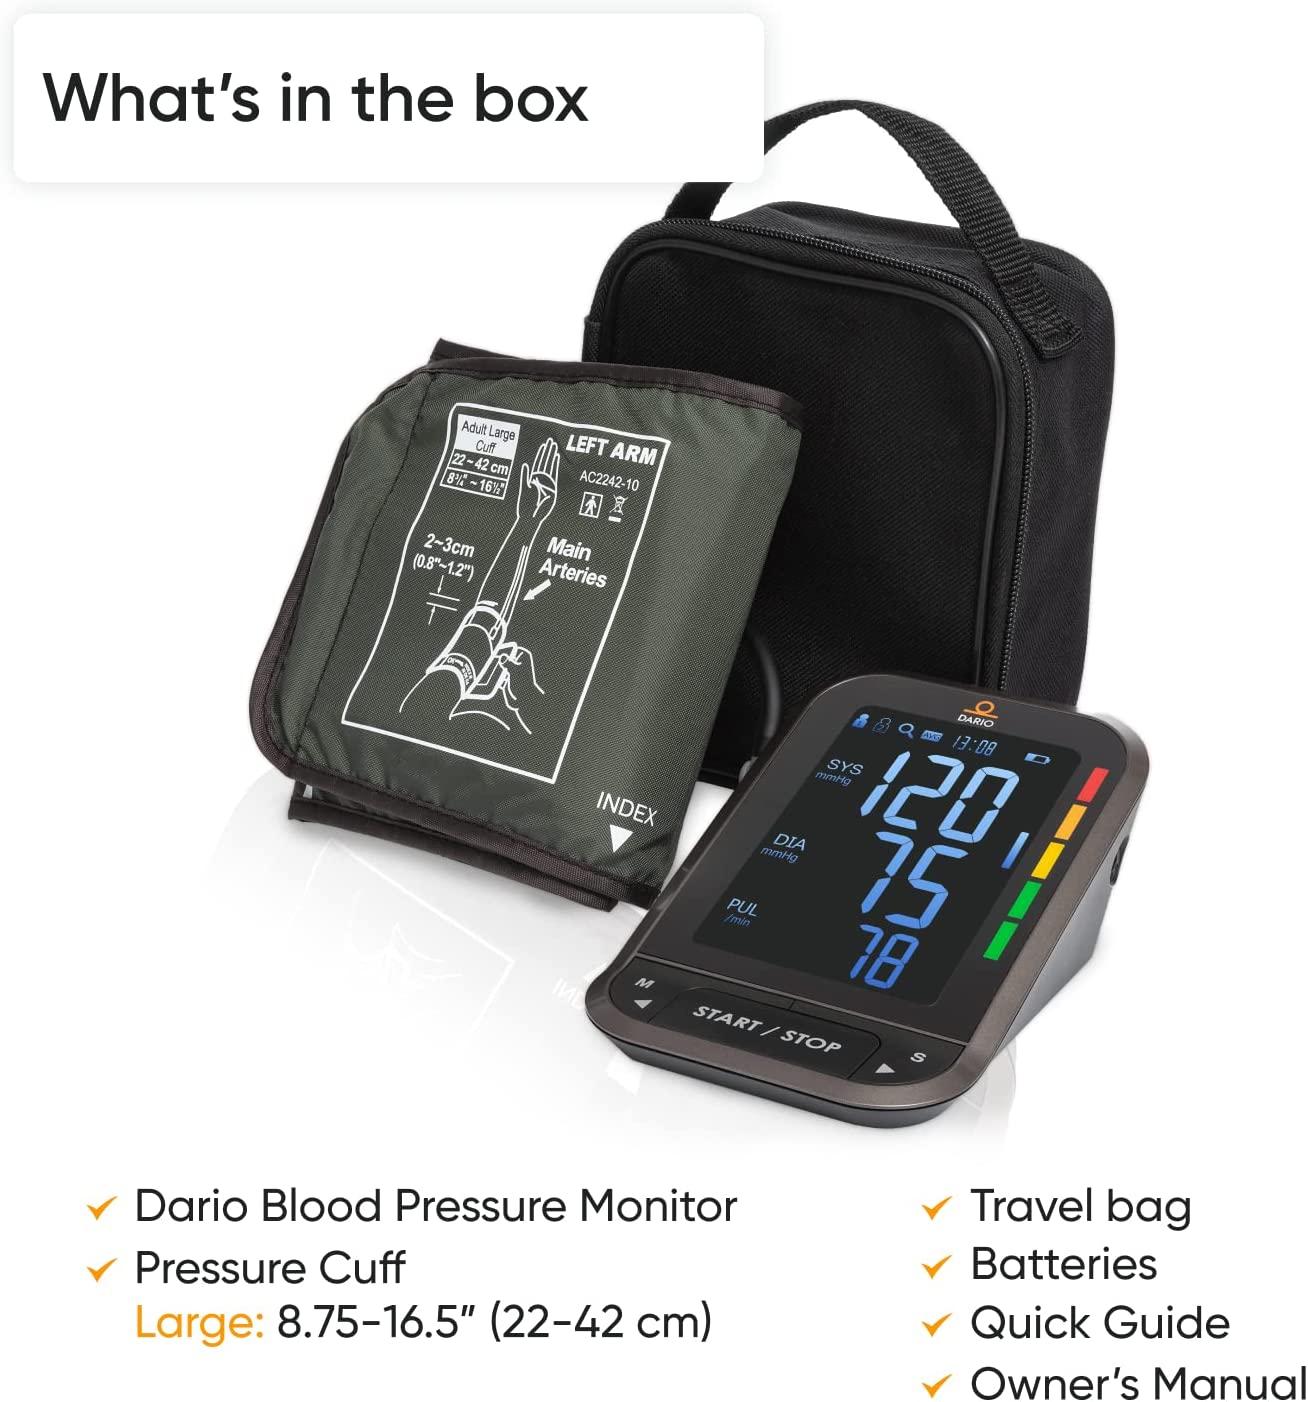  Dario Blood Pressure Monitor for Home Use Gen1 Automatic Machine,  Large Adjustable Arm Cuff (9.4-17inch), Smart Bluetooth App & Carry Case :  Health & Household